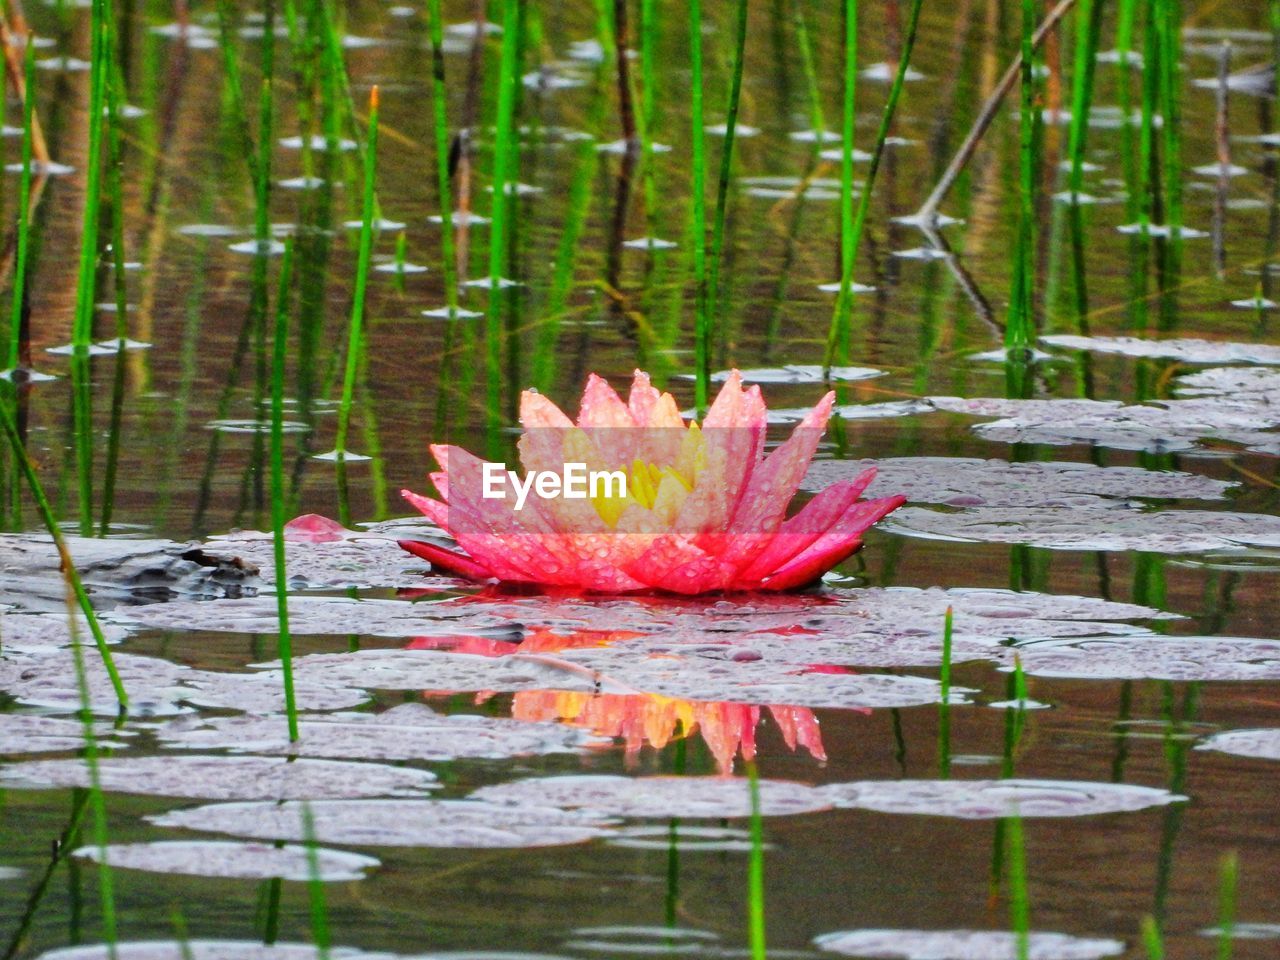 WATER LILY IN LAKE